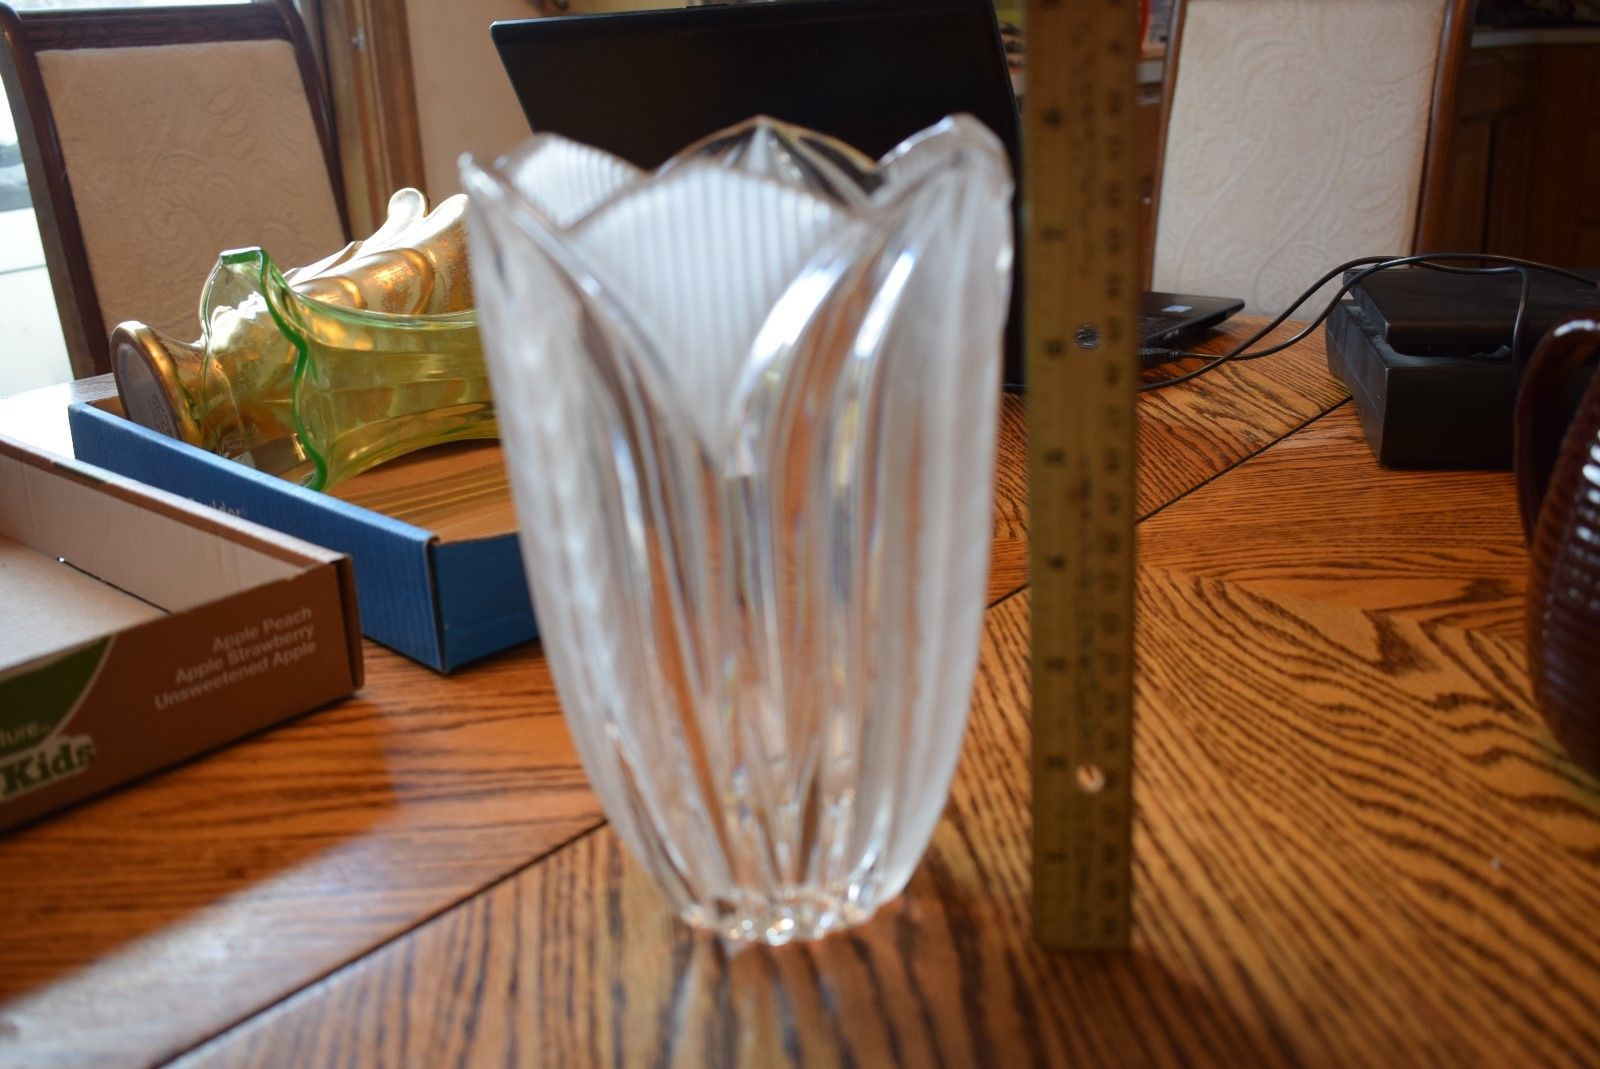 mikasa florale crystal vase of mikasa frost crystal vase pattern unknown tulip style 12 00 throughout mikasa frost crystal vase pattern unknown tulip style 1 of 1only 1 available